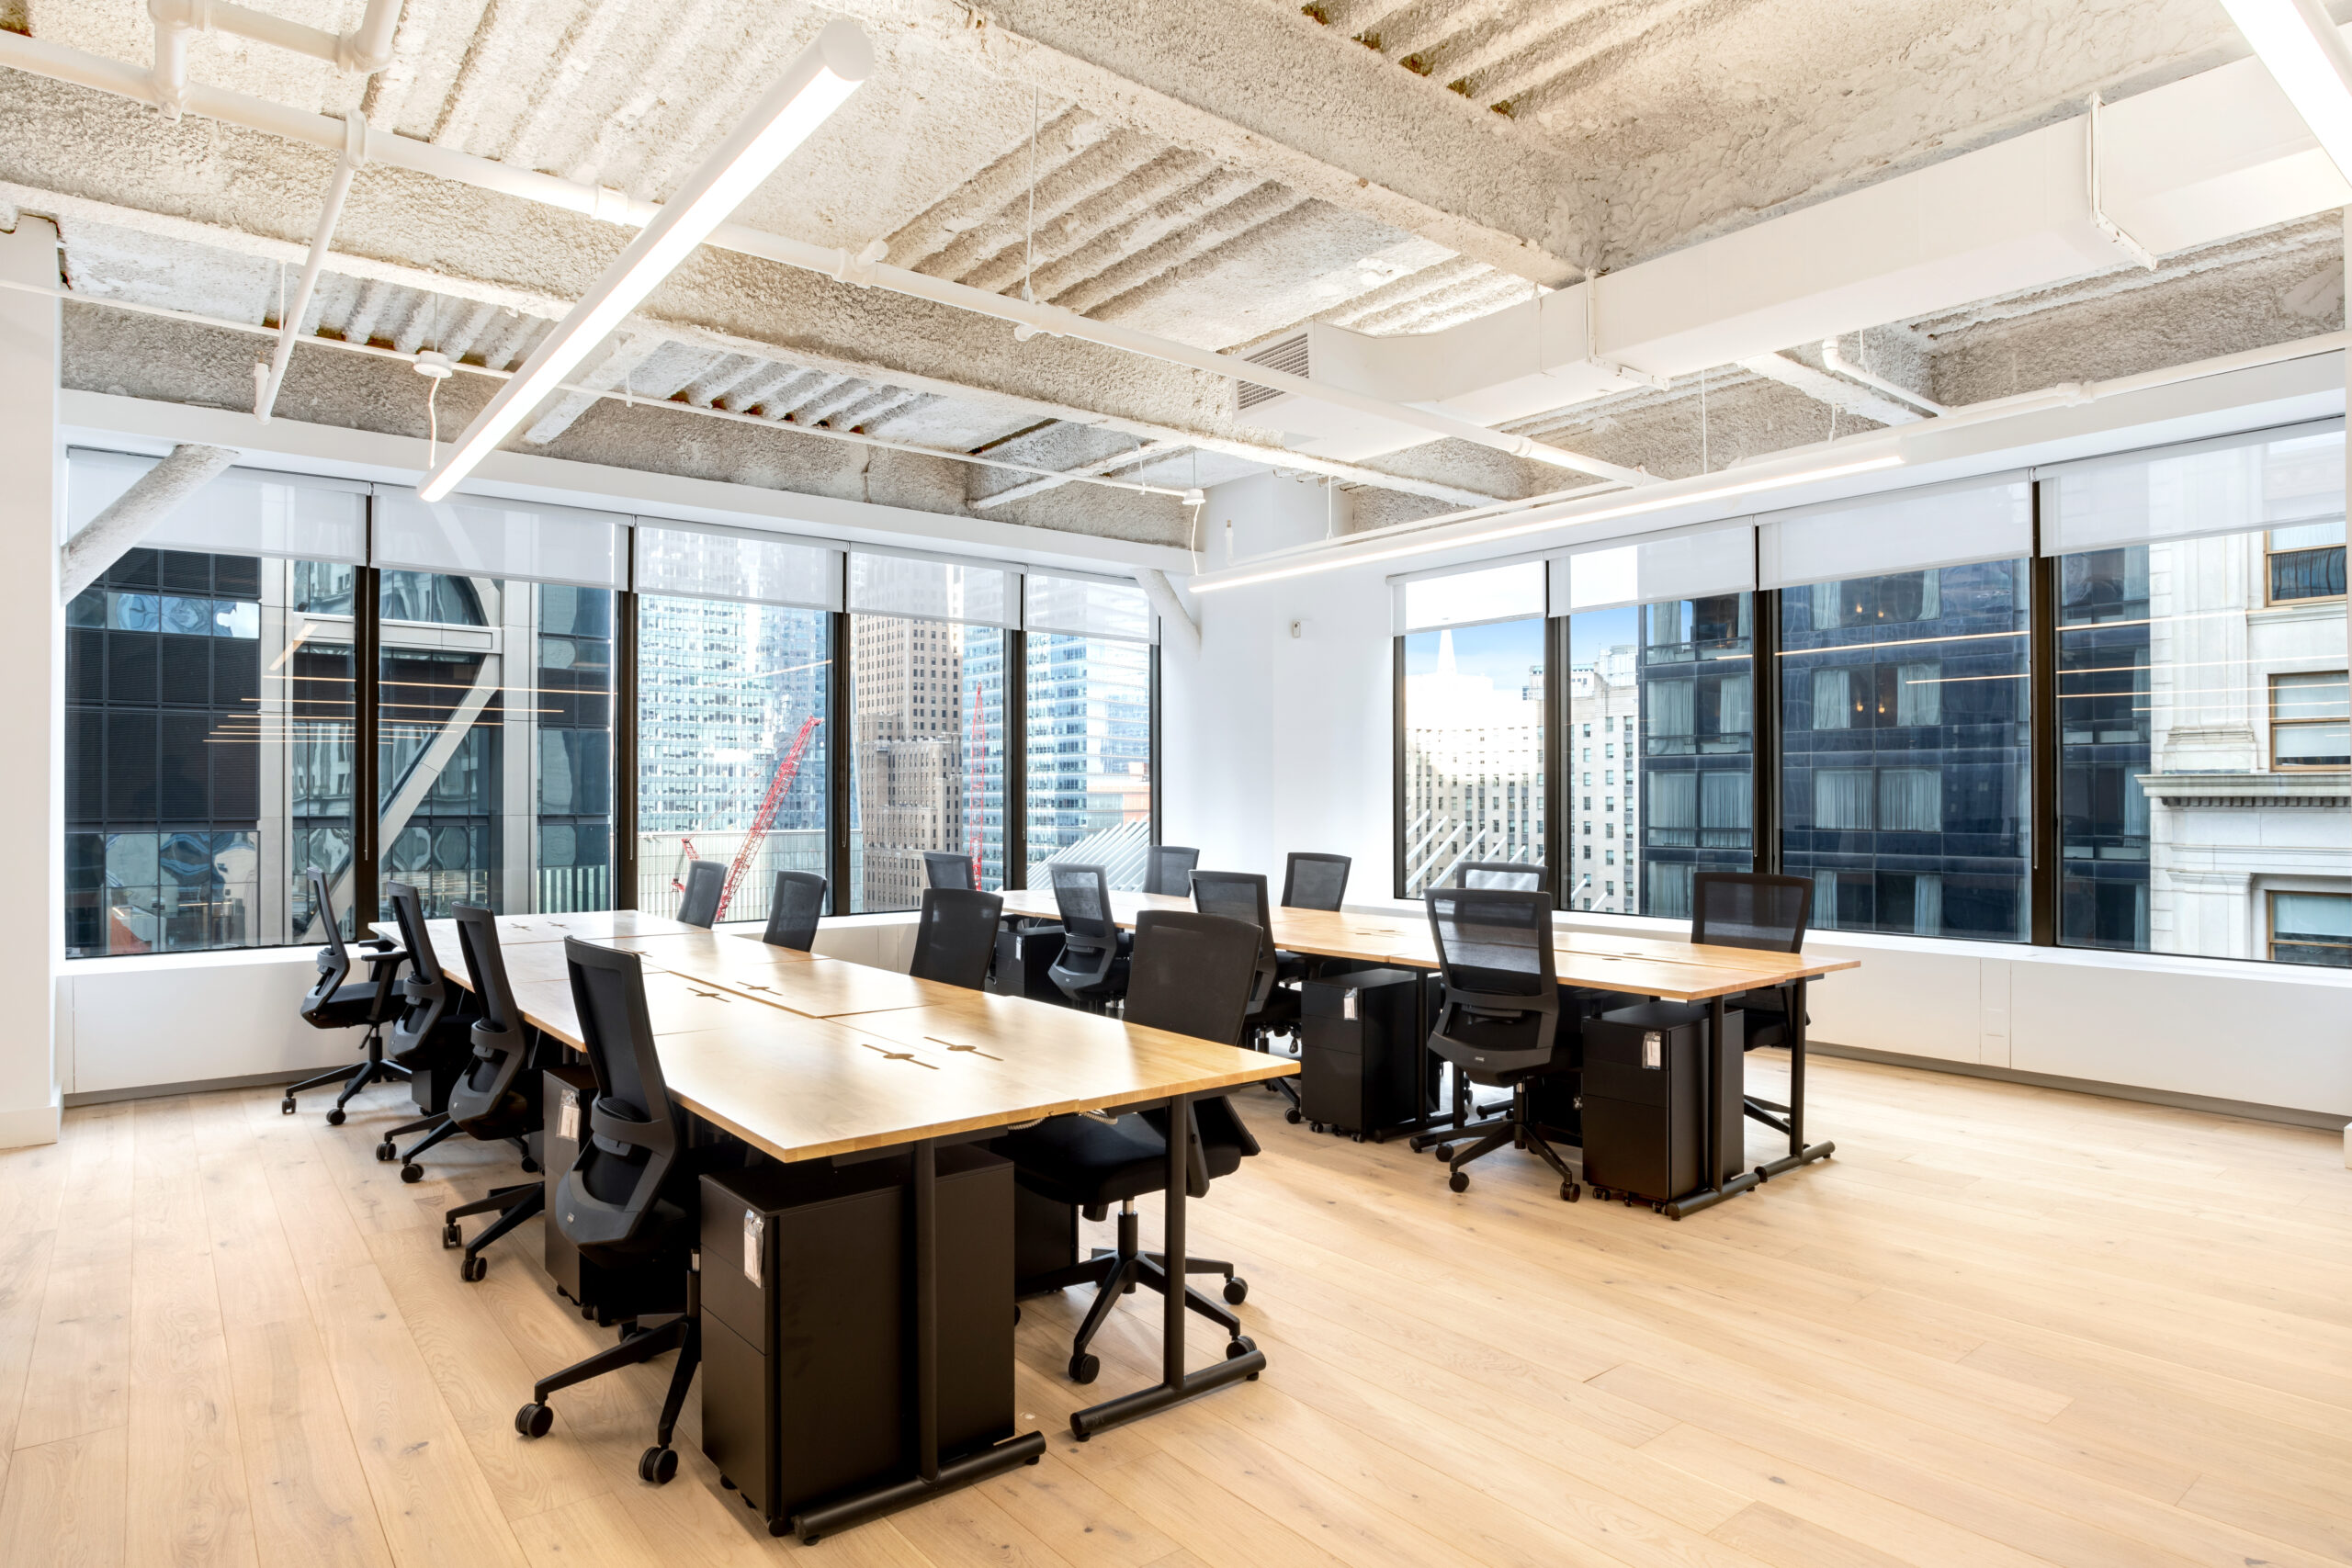 wework office space at 22 Cortlandt with conference tables